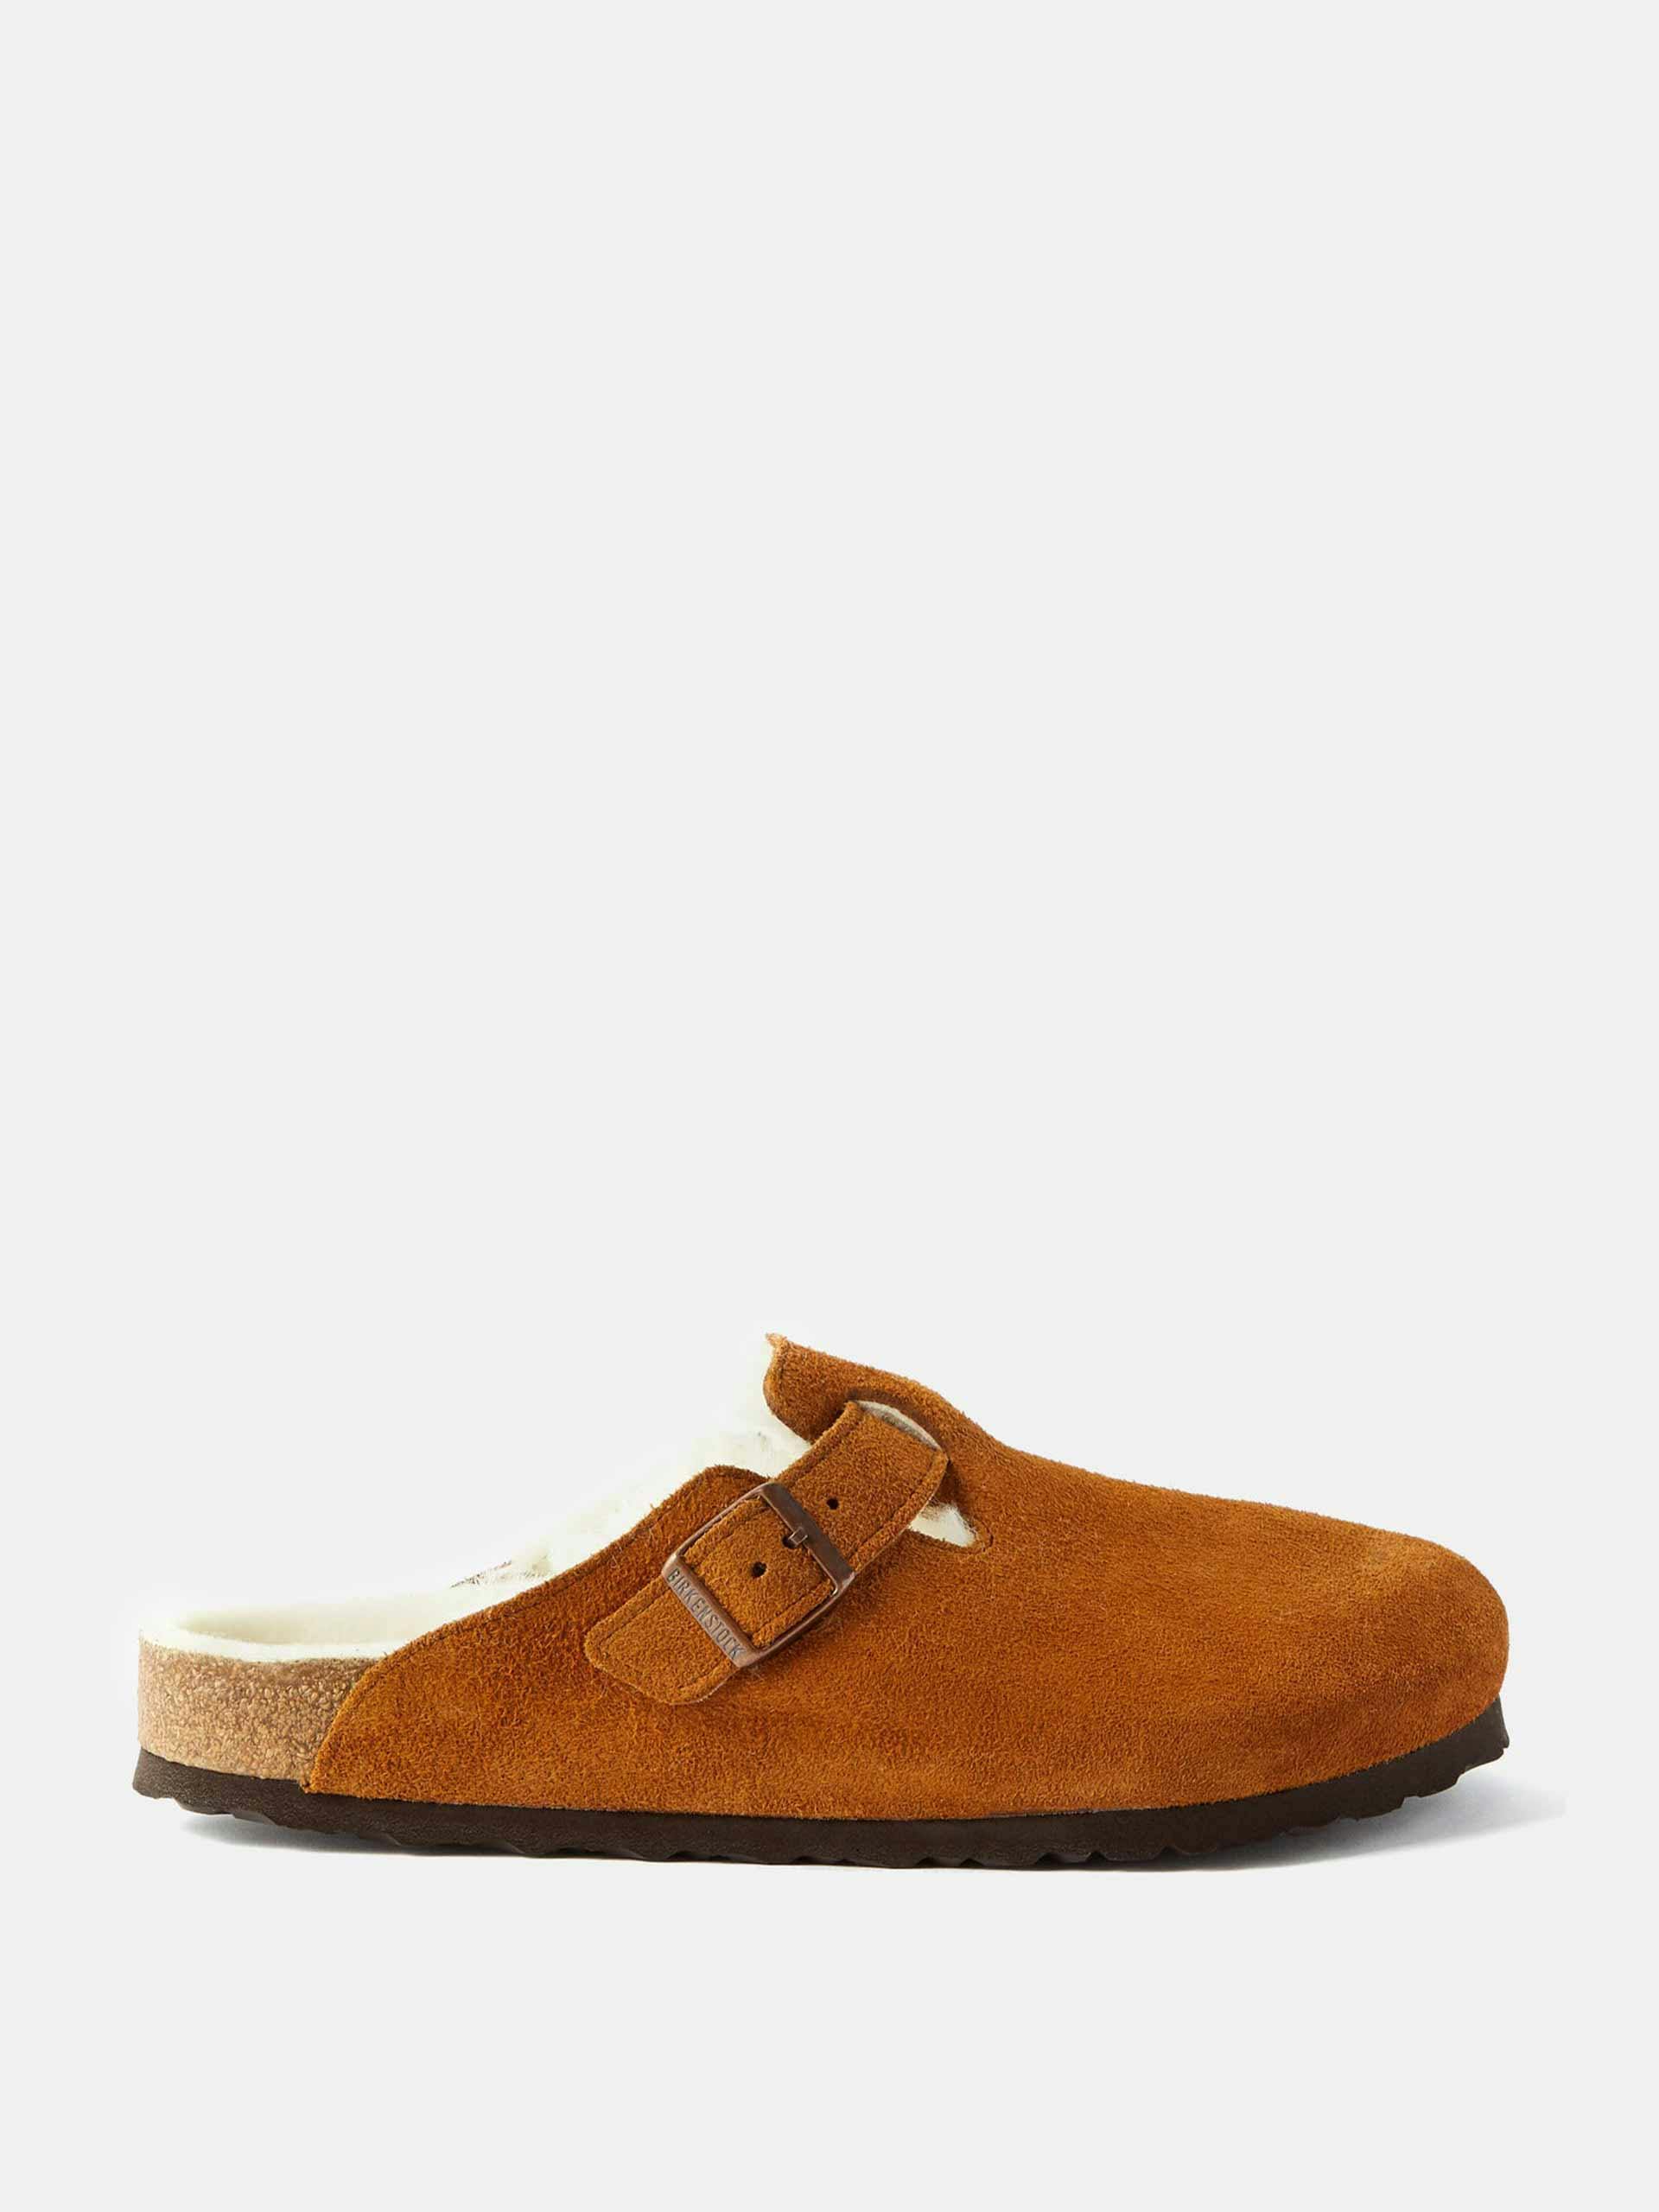 Shearling-lined suede loafers